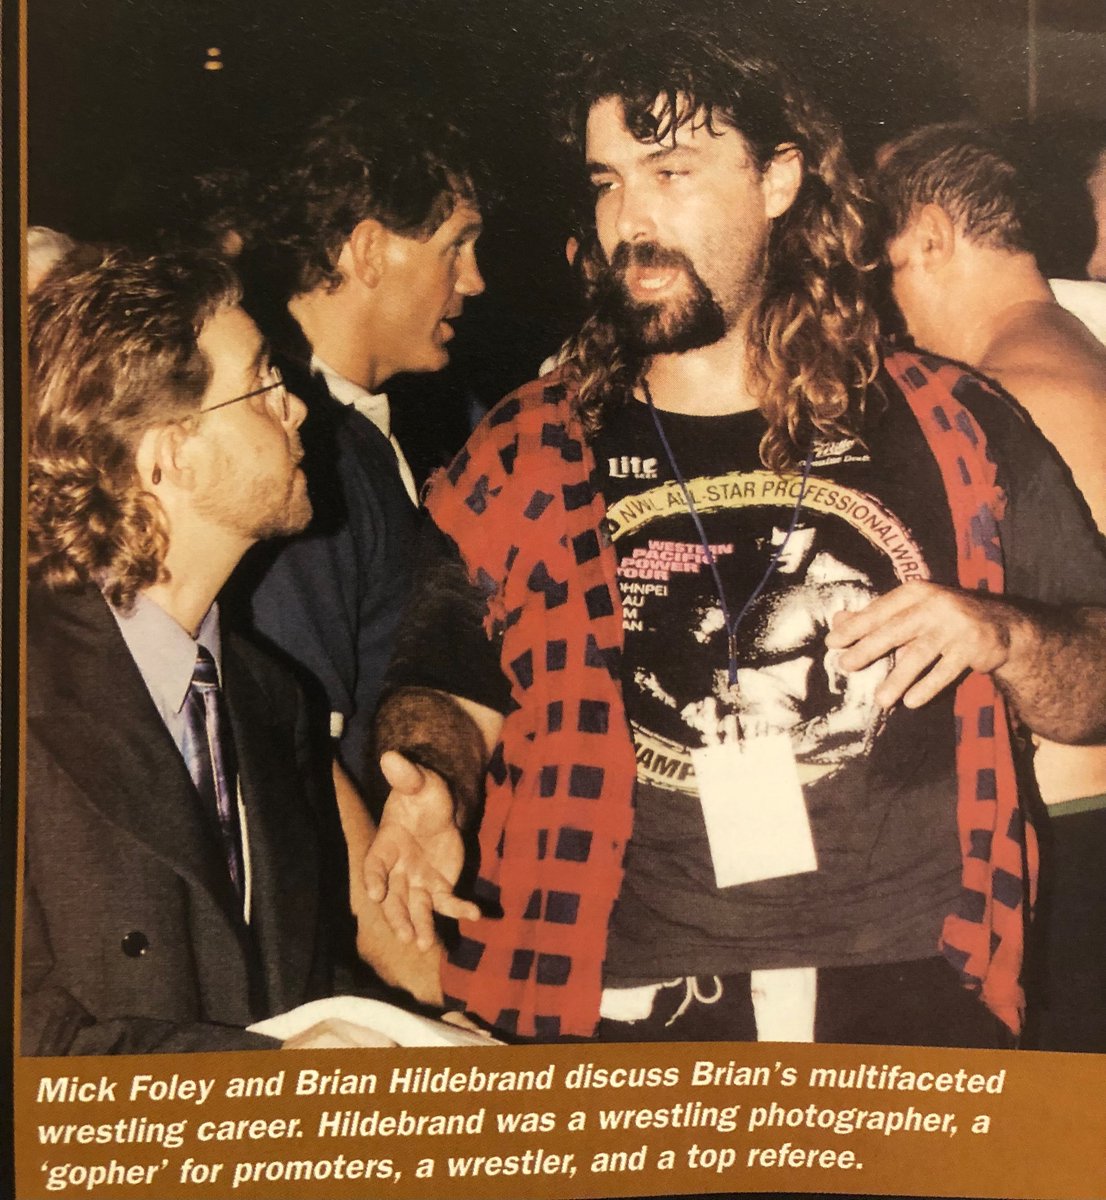 Brian Hildebrand and Mick Foley at “Curtis Comes Home” fundraiser for Brian.  From WOW magazine issue 8.

#brianhildebrand #mickfoley #markcurtis #wrestling #attitudeera #classicwrestling #90swrestling #wcw #curtiscomeshome #smw #wrestlingreferee #wowmagazine